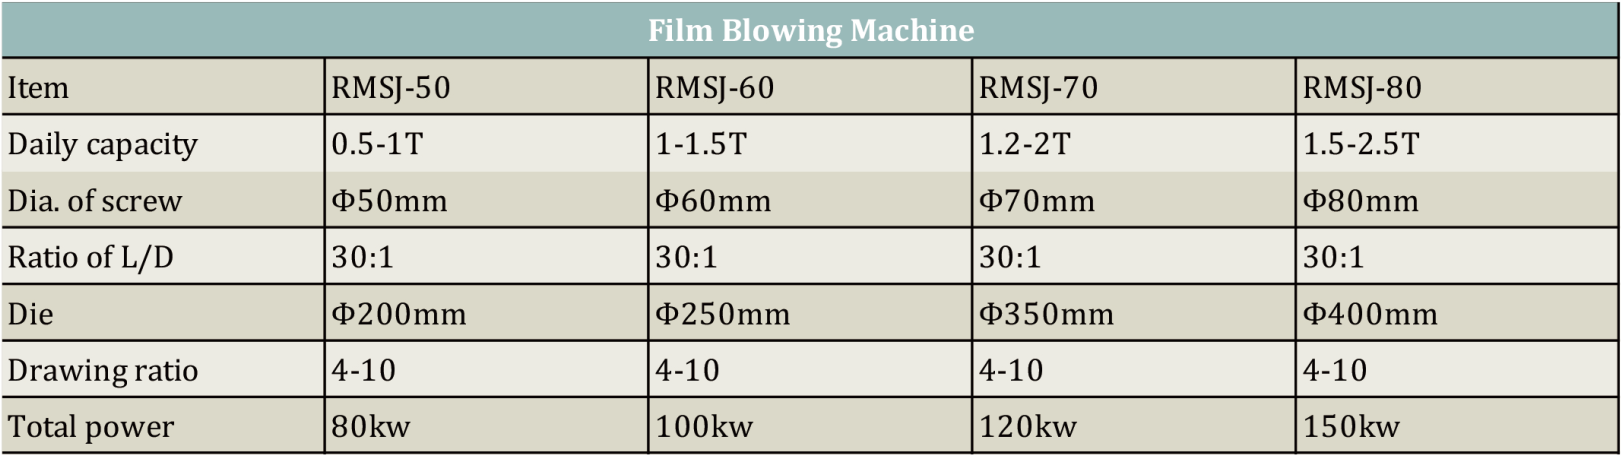 specification of Film Blowing Machine.png